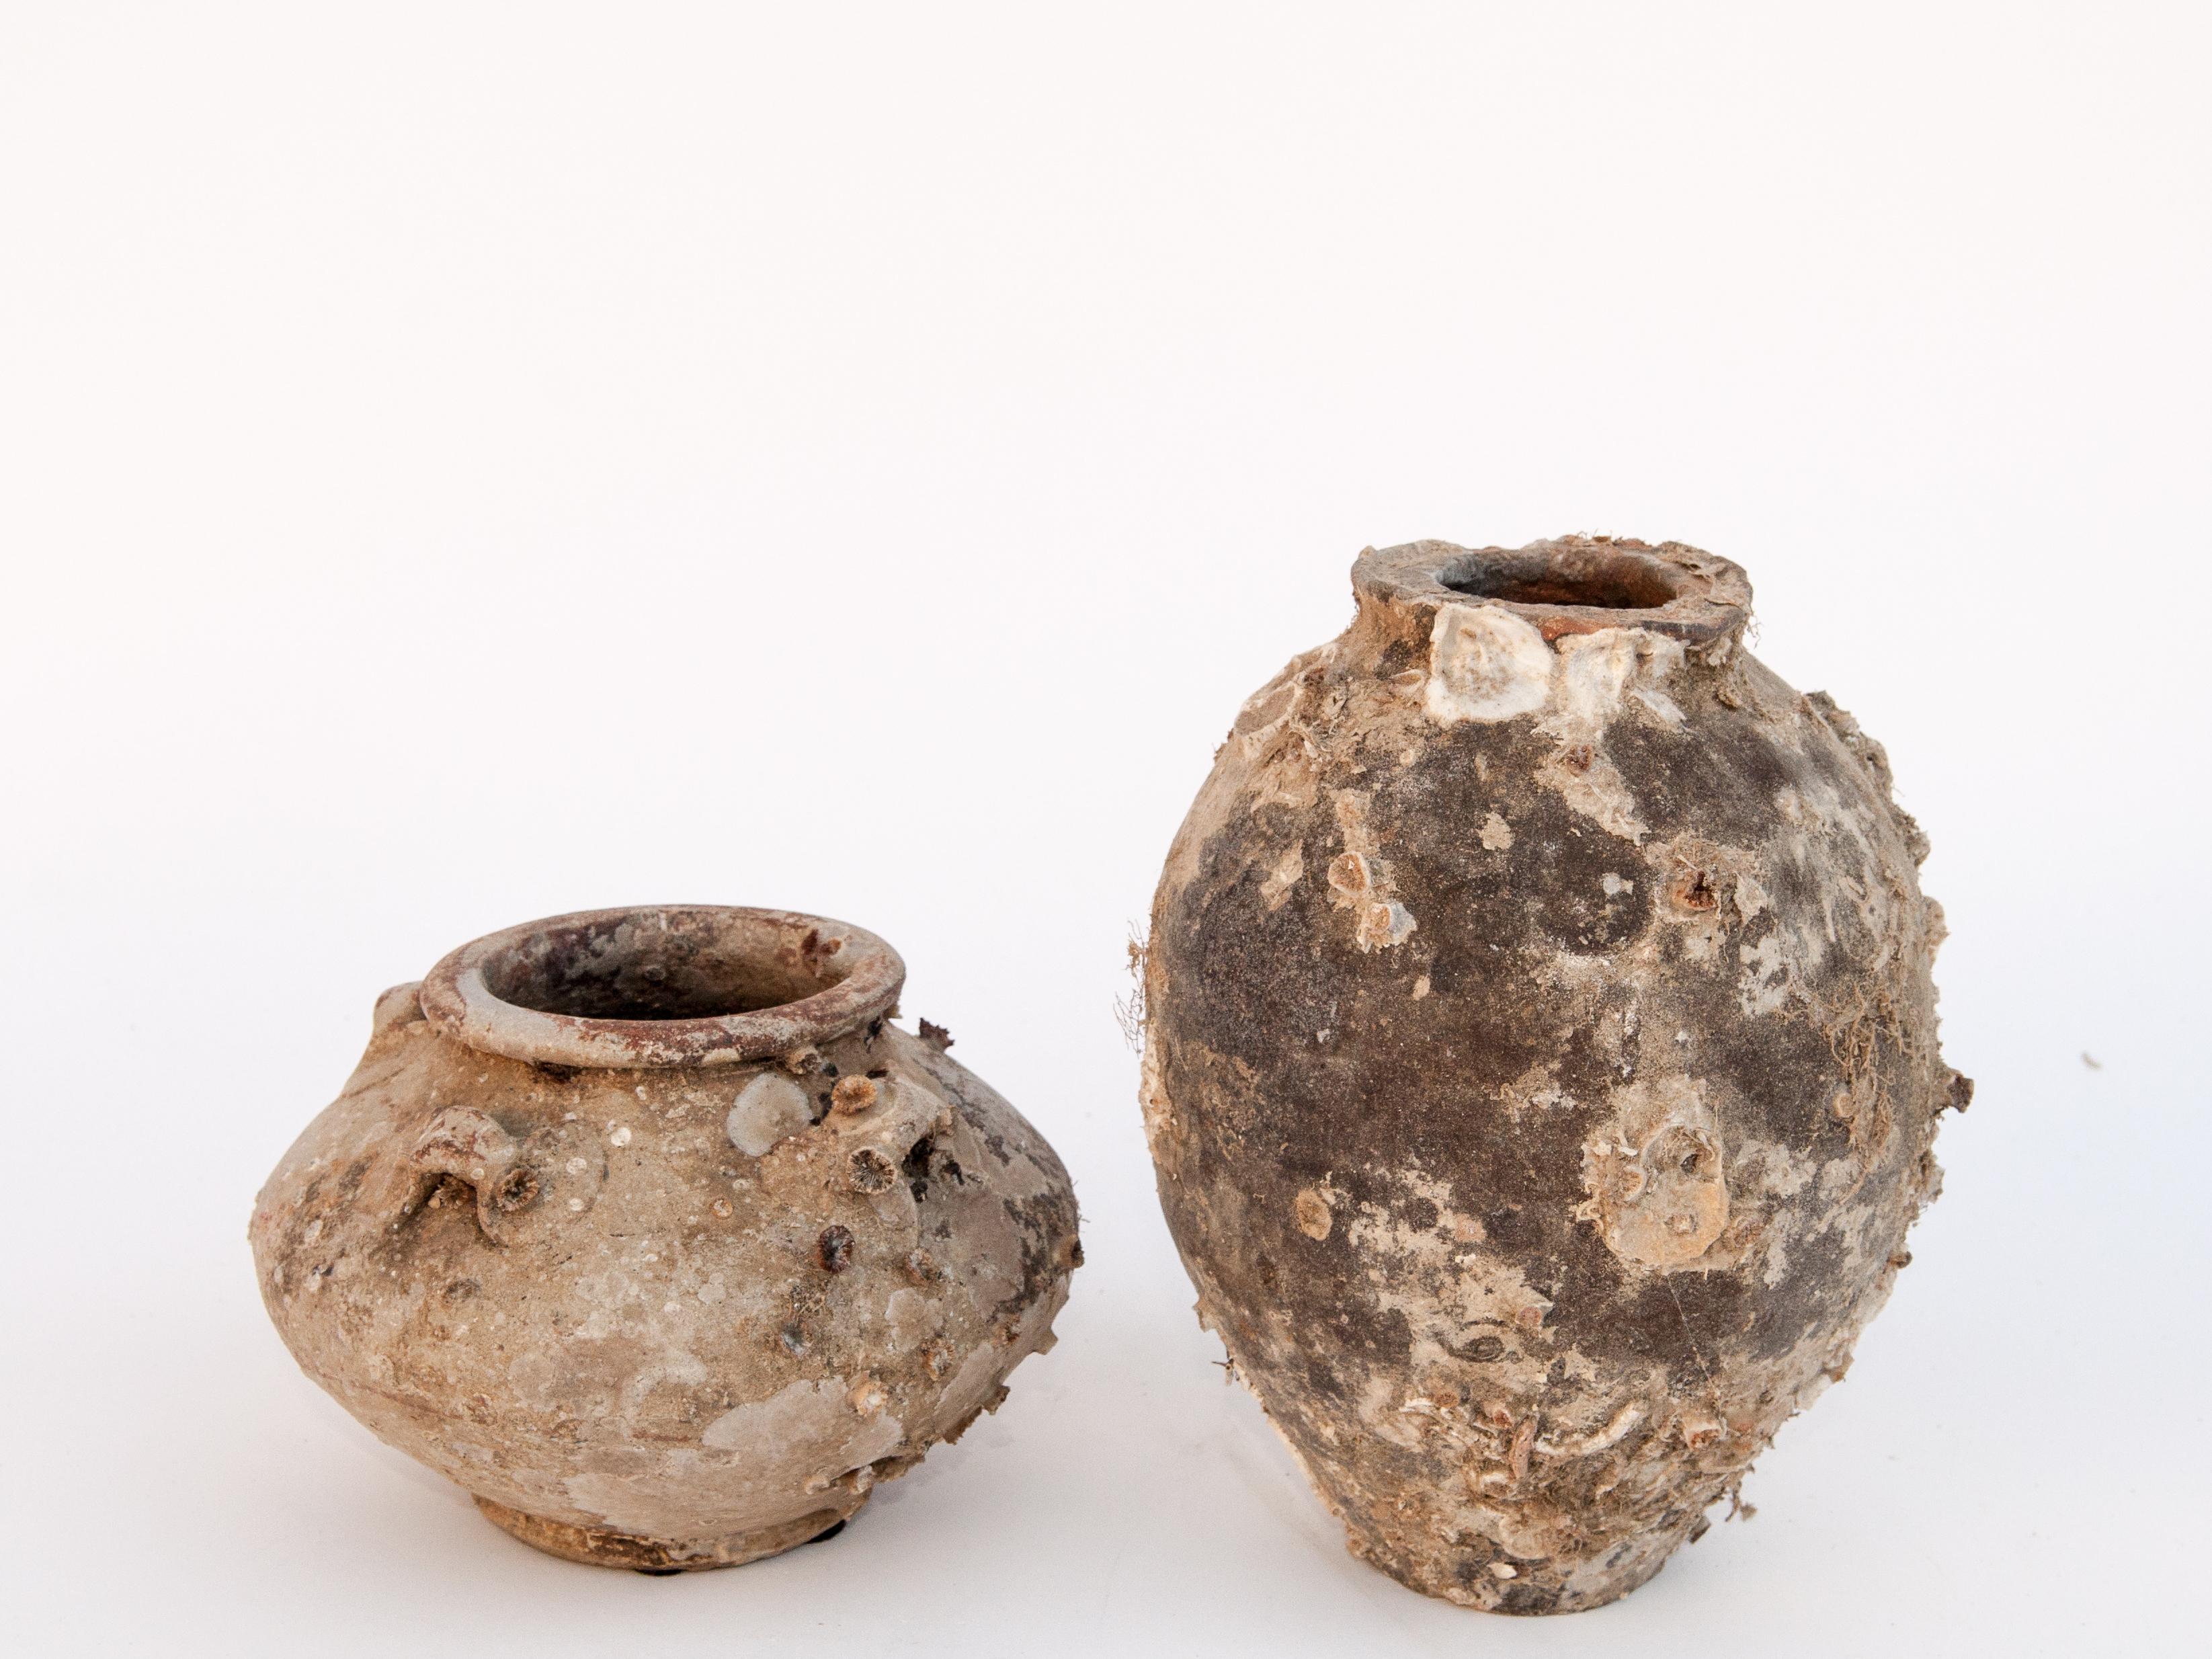 Pair of antique song dynasty jars with encrustations, China, 12th century. 4.5 and 7.75 inches tall.
These two Song Dynasty jars were salvaged from shipwrecks off the coasts of Malaysia and Indonesia. Such jars and other ceramics made up an